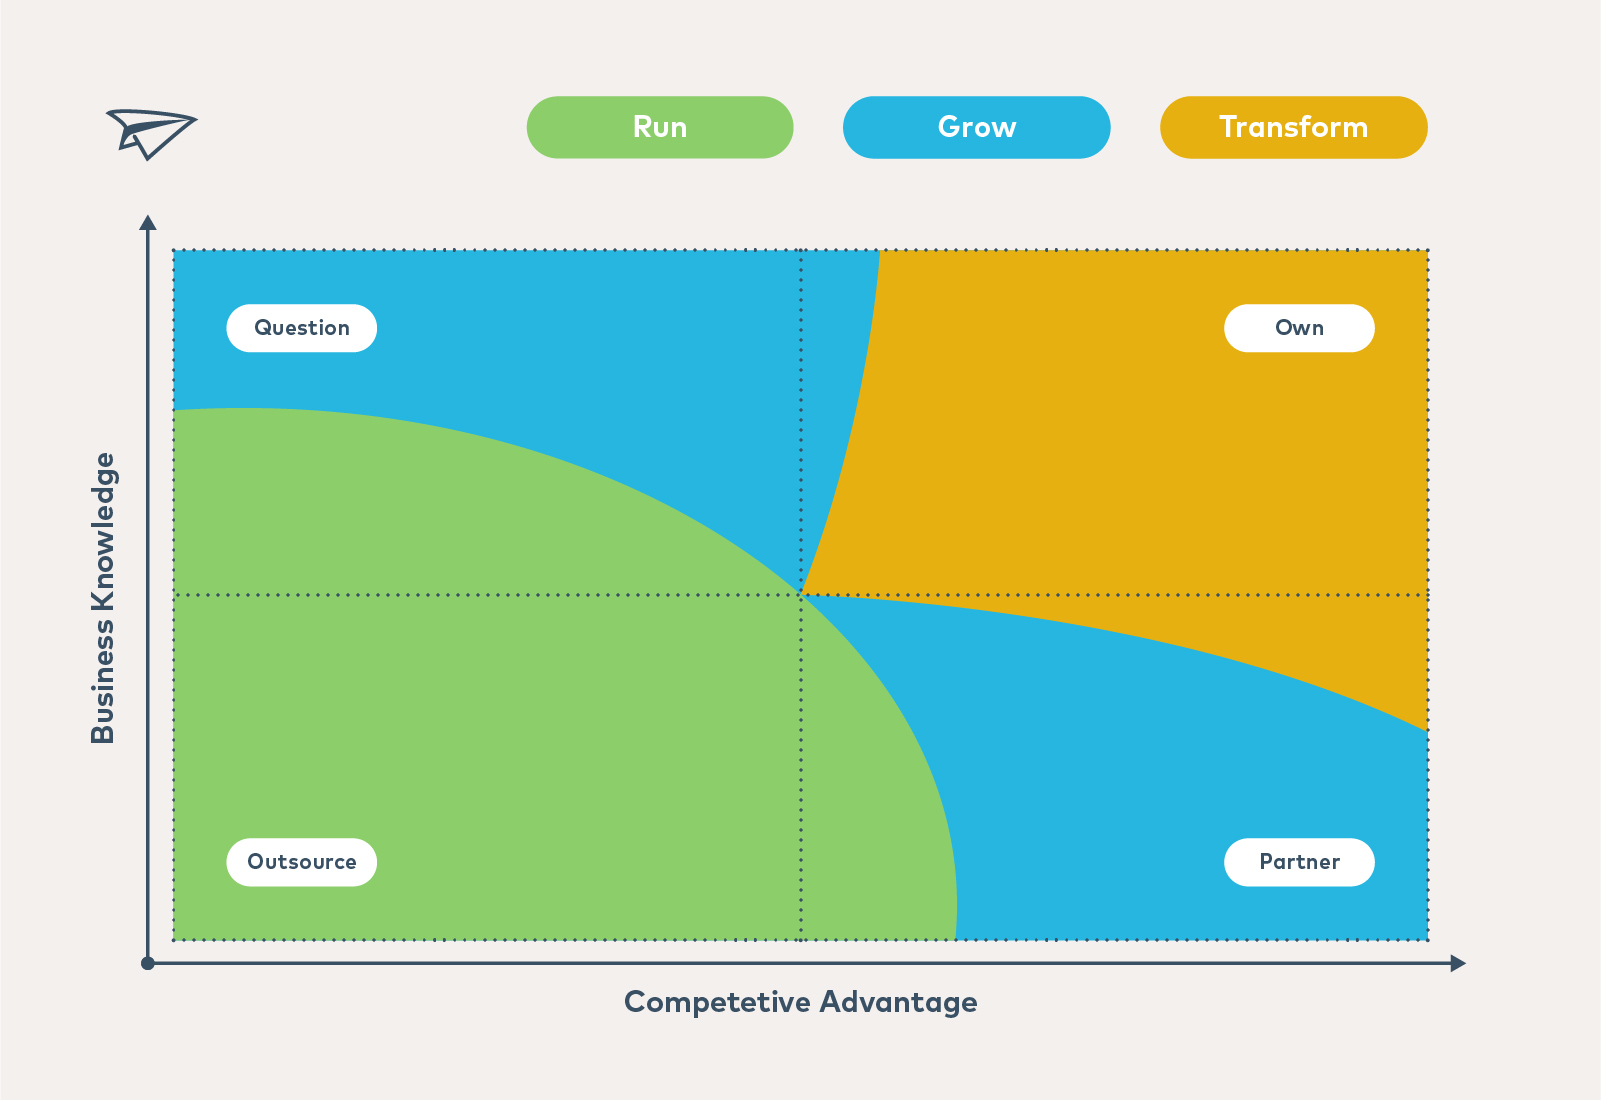 Graph of Business Knowledge vs Competitive Advantage With Regions for Run, Grow and Transform Actions